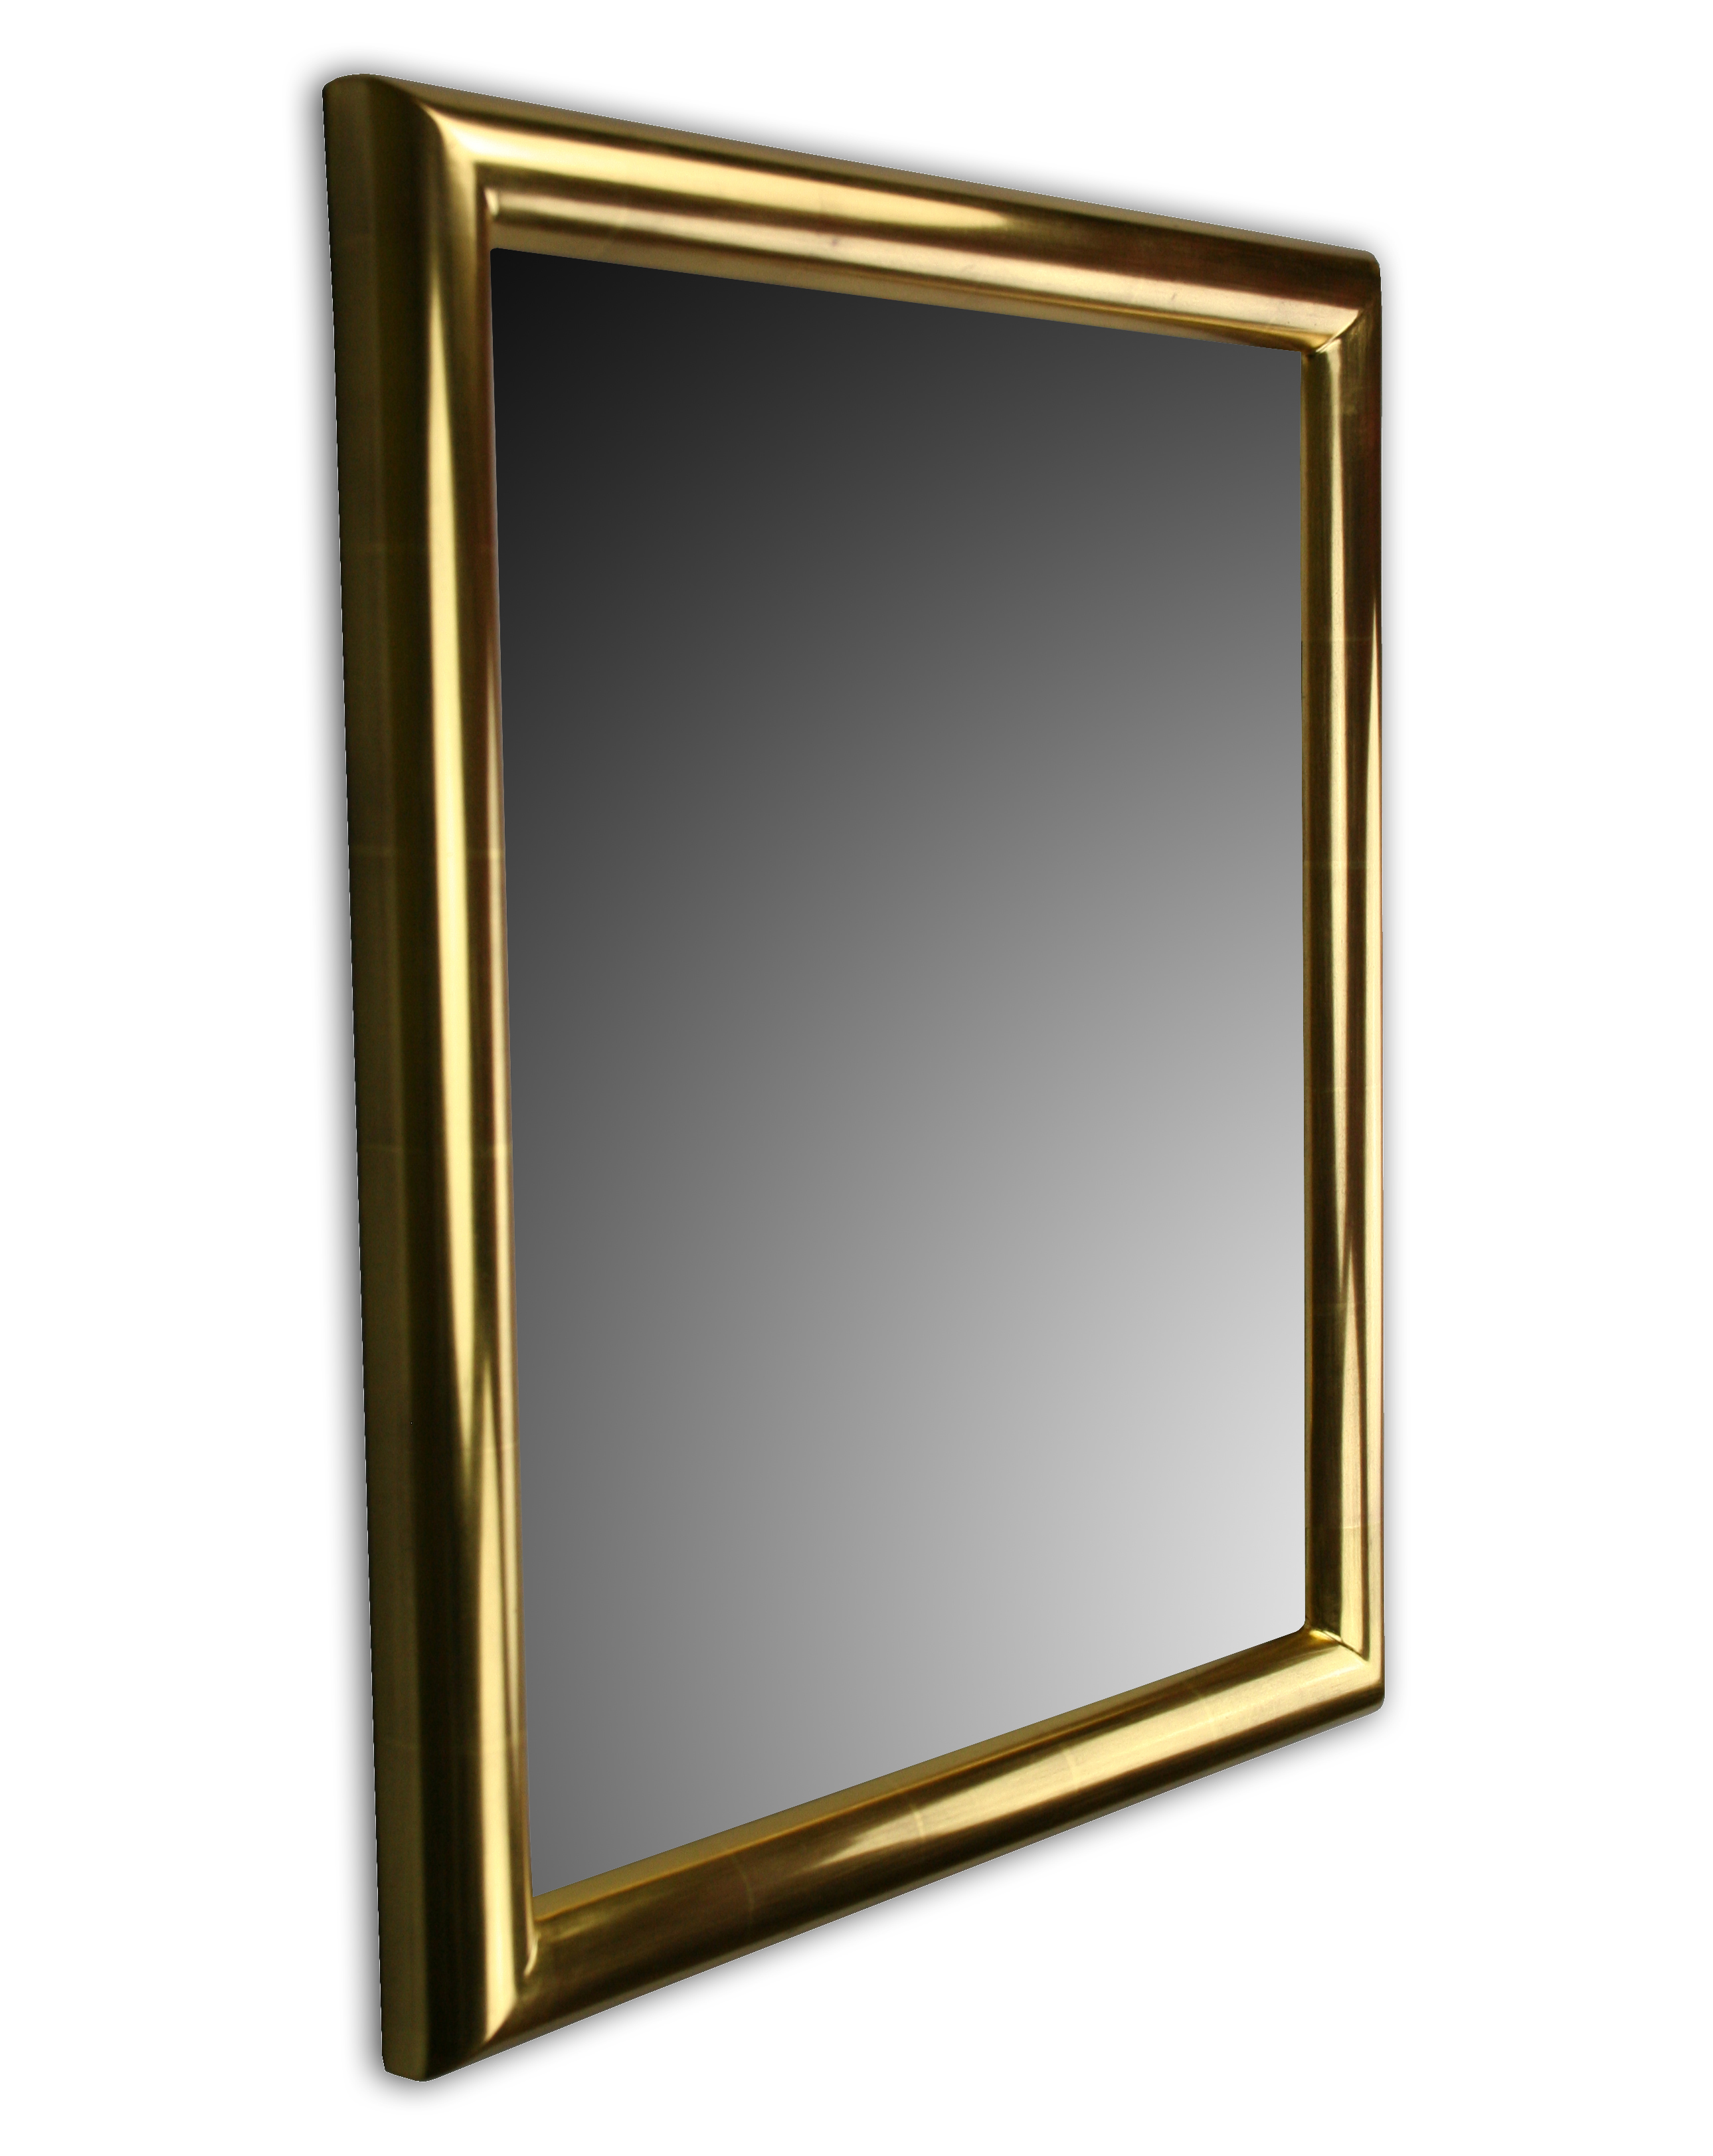 A mirror in a glamour frame